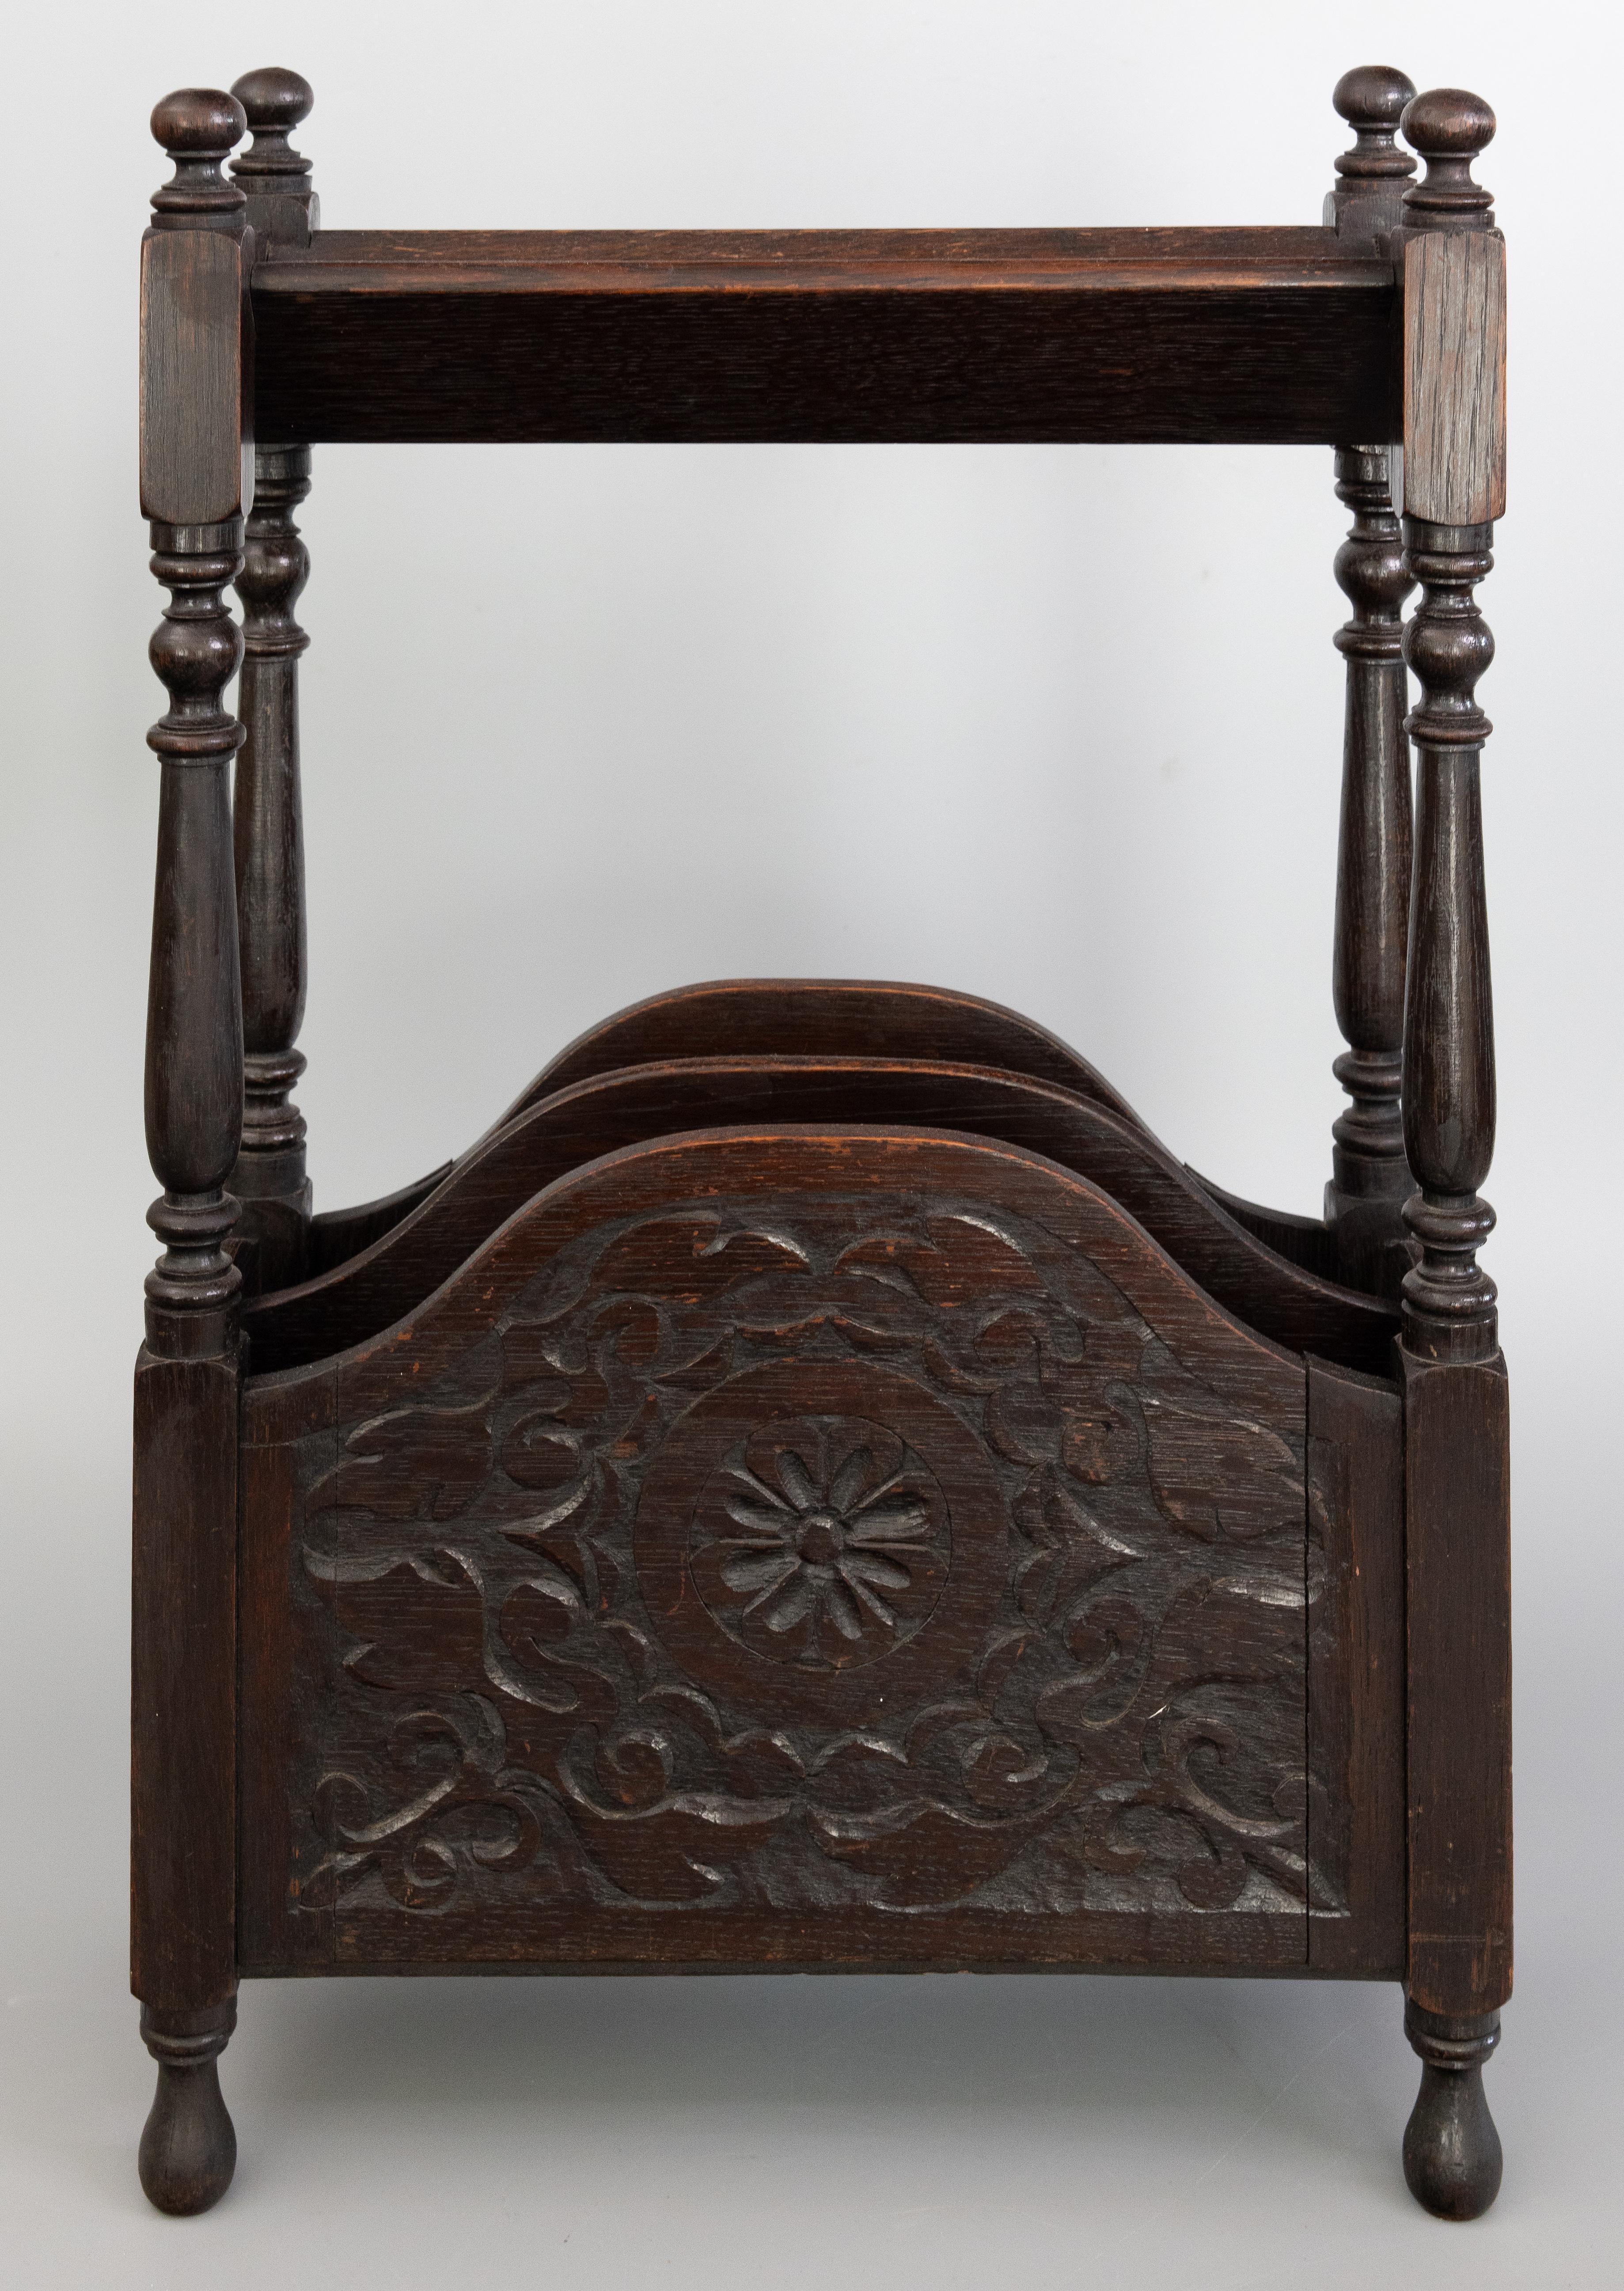 A superb antique English Edwardian hand crafted oak book trough and magazine rack stand, circa 1910. This fine stand has hand turned legs and hand carved floral and scroll designs in a lovely patina. It's perfect for storing magazines and books in a